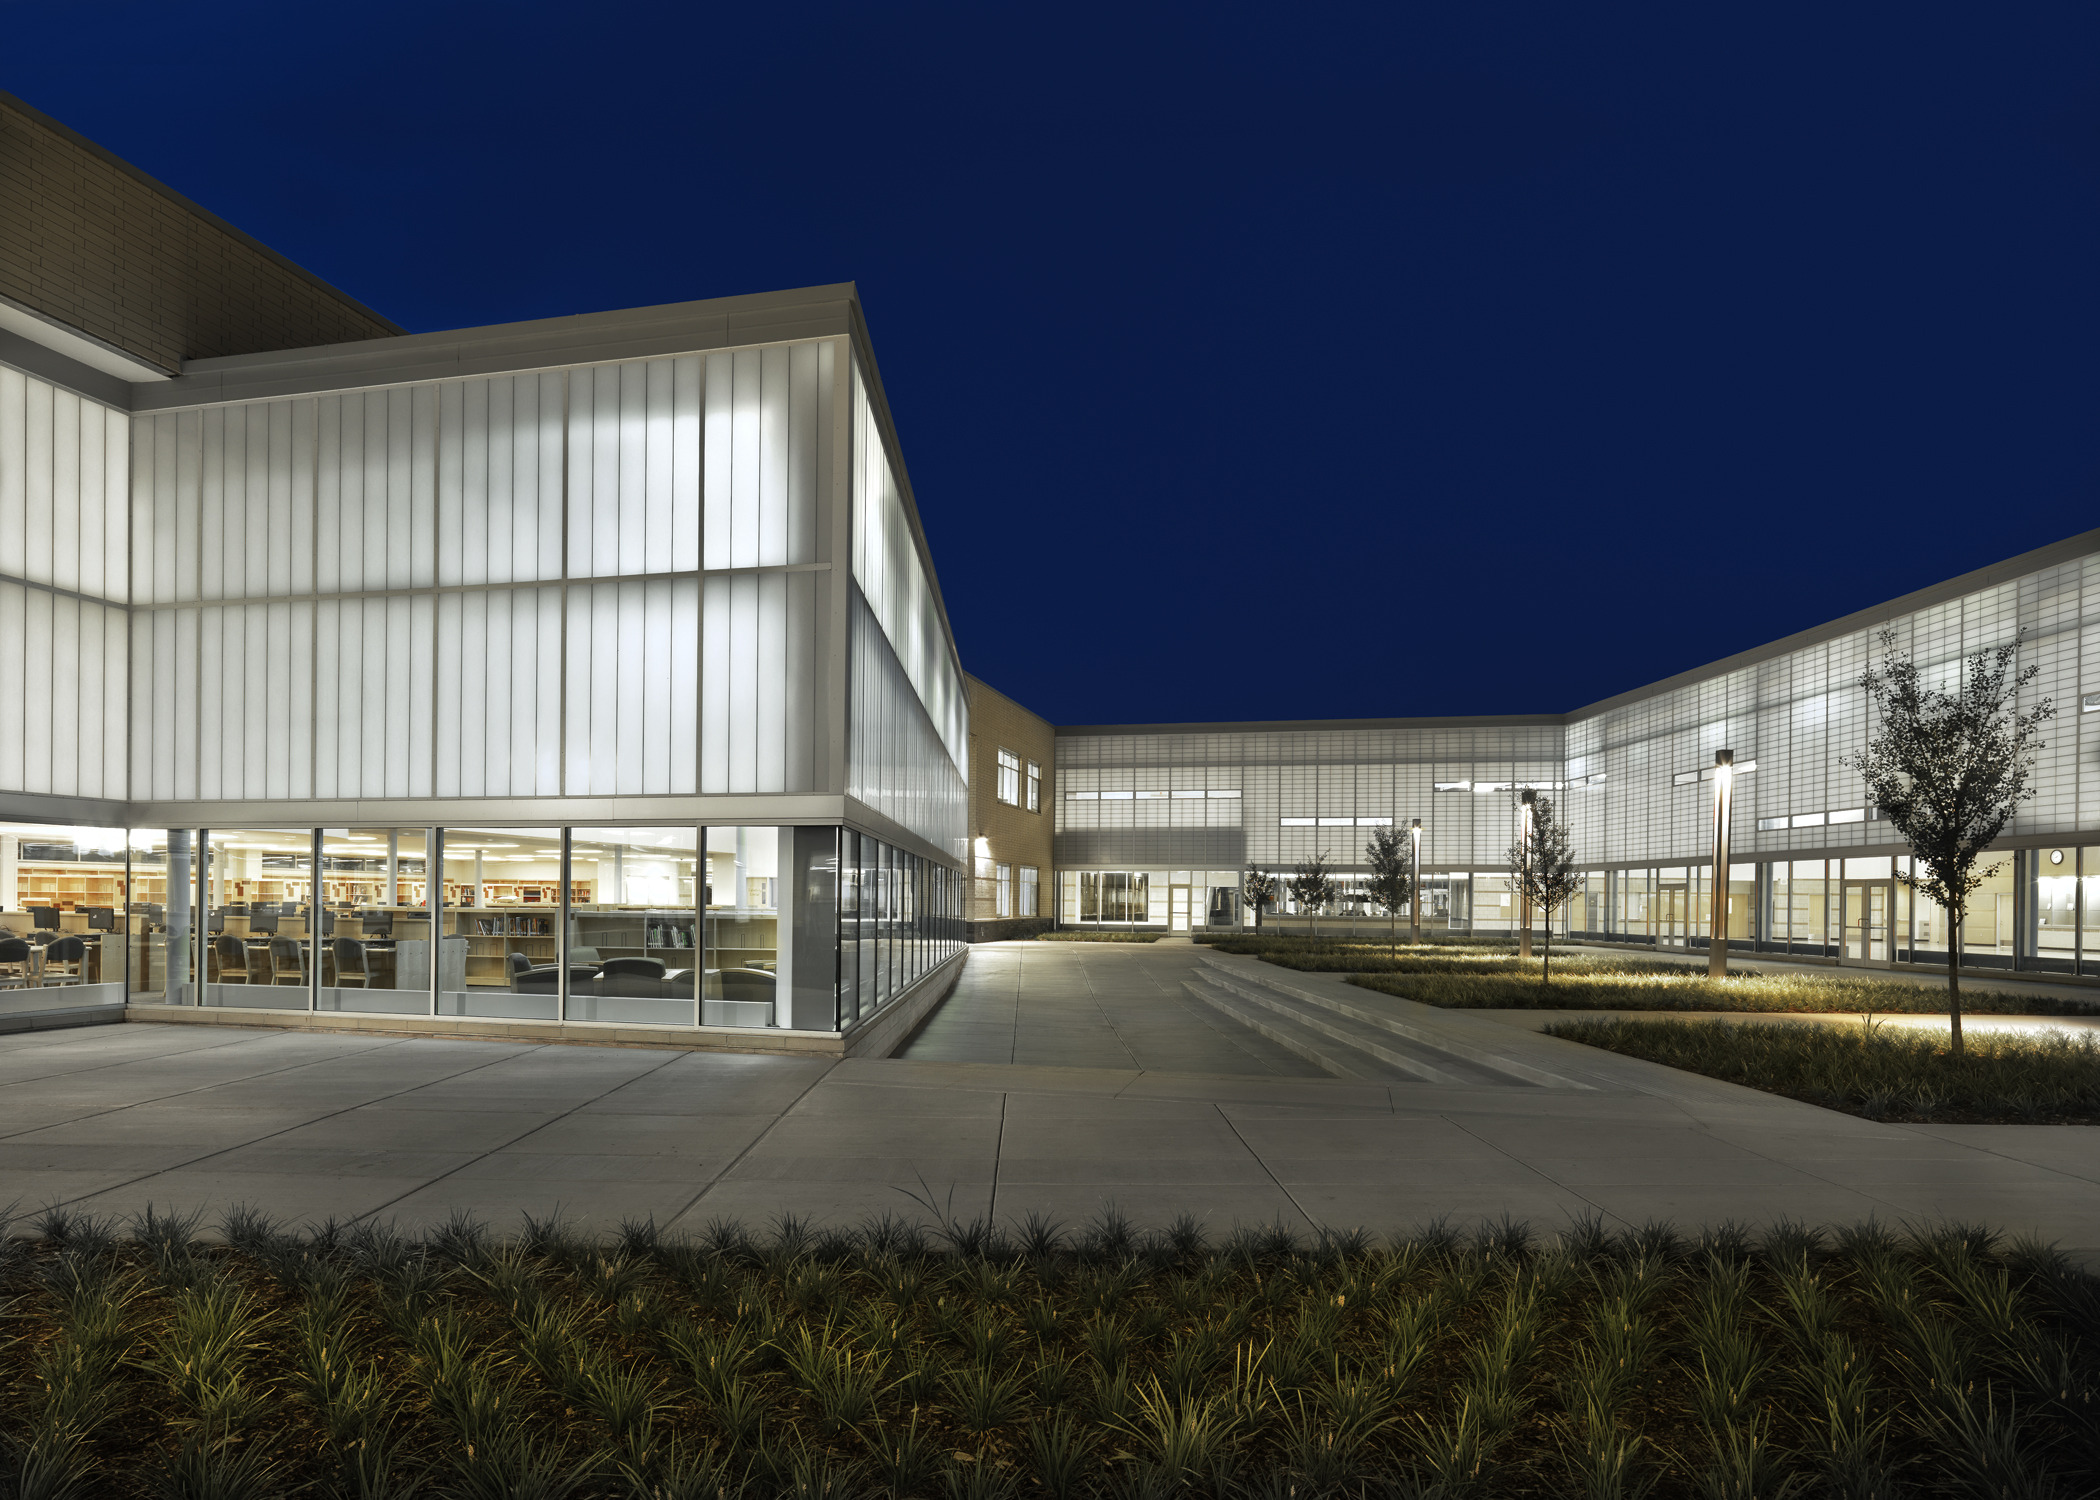 Exterior view of campus, floor-to-ceiling windows, cut out windows, high-ceilings, translucent wall panels filter natural light into the school’s common spaces, these panels shine as a beacon of light on the prairie at night, landscaped courtyards and grounds, trees